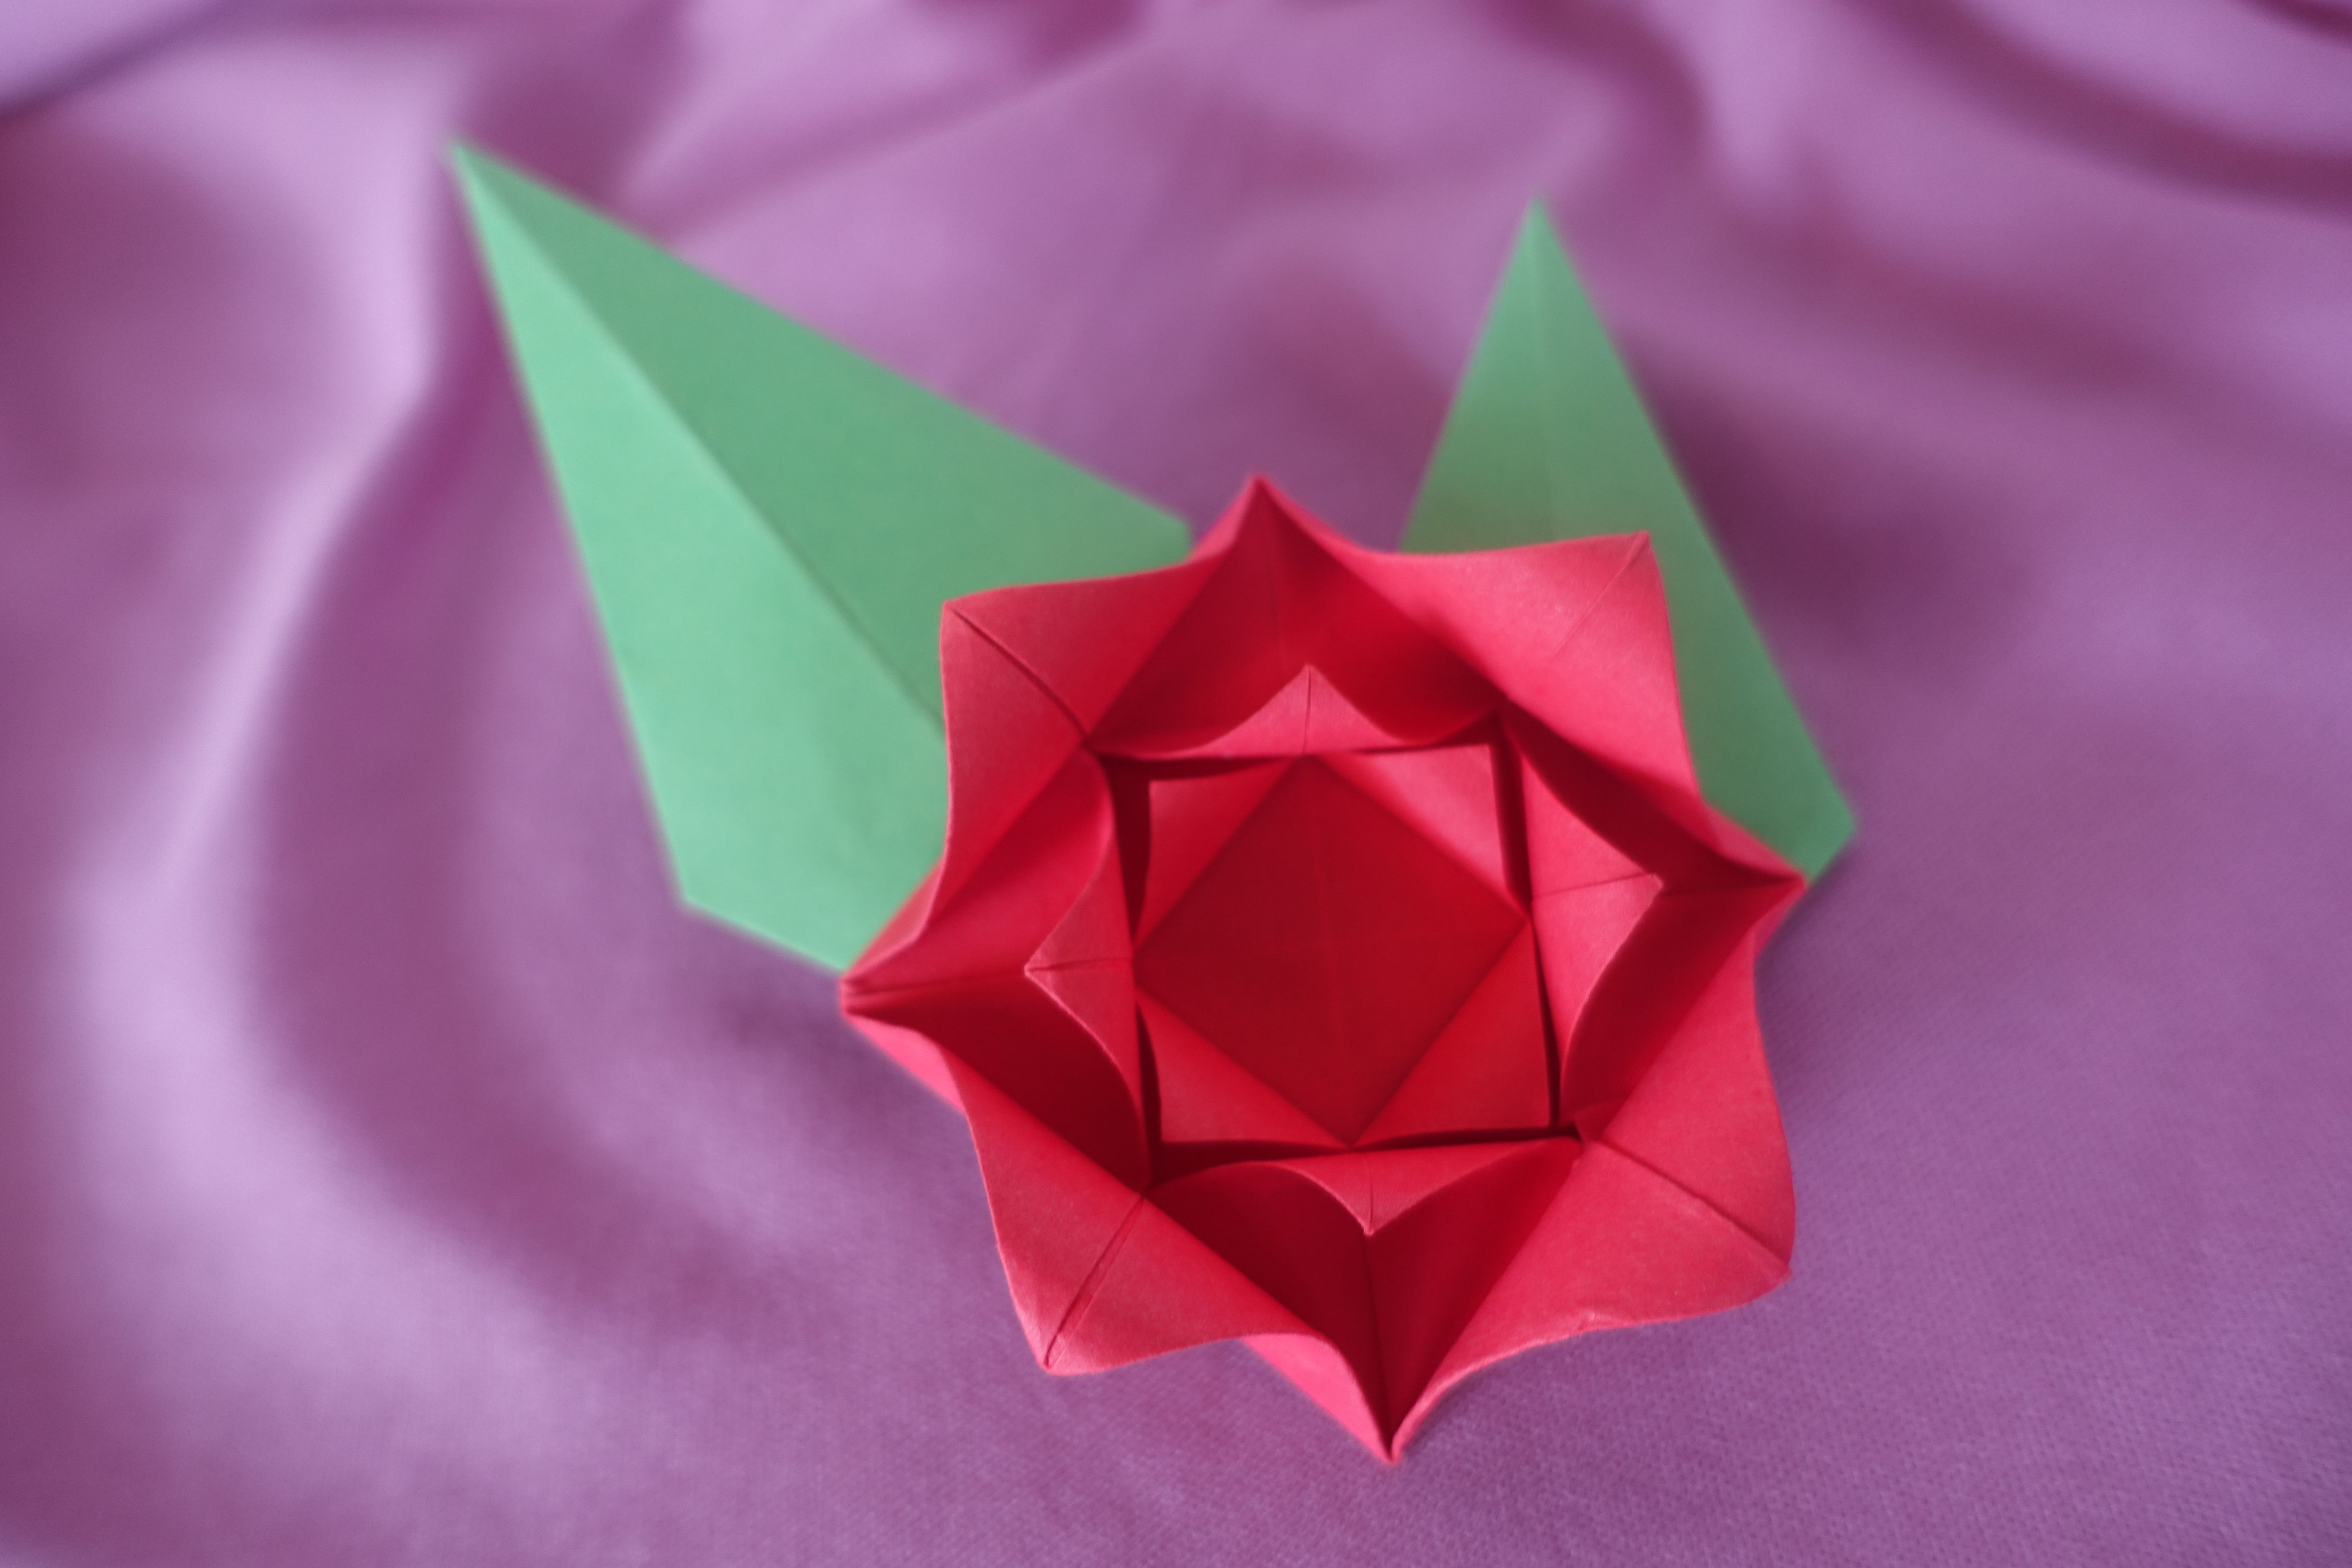 How To Make An Origami Flower Easy Make An Easy Origami Rose